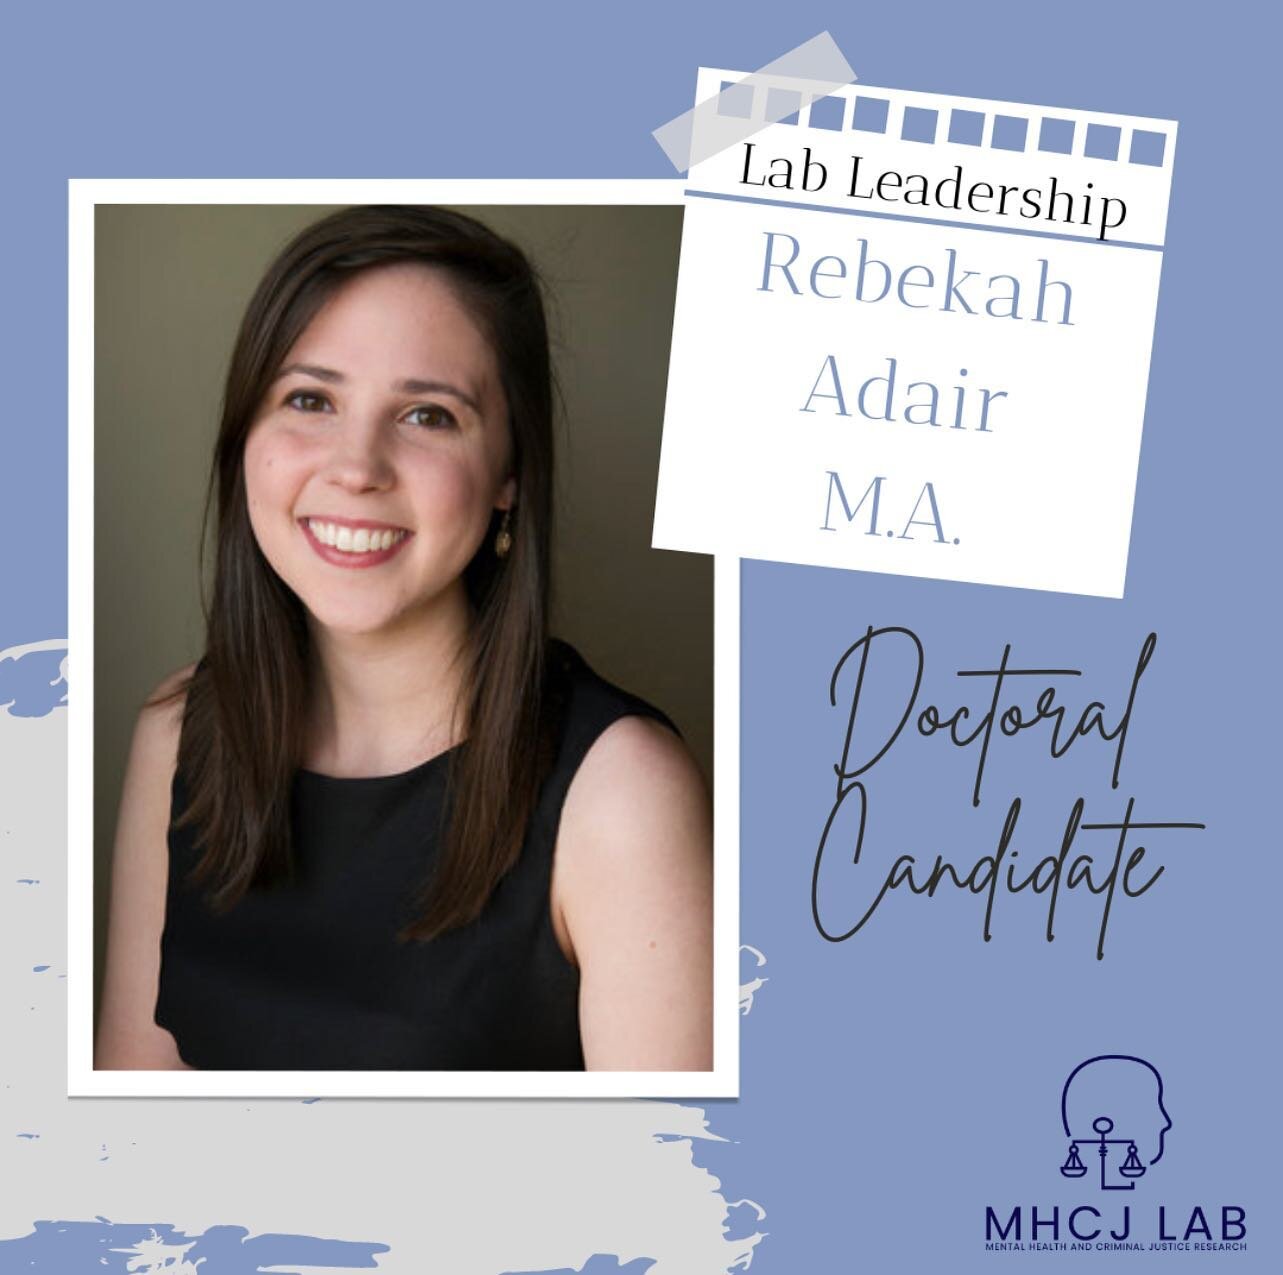 We would like to introduce one of our graduate students: Rebekah Adair

Rebekah is a doctoral candidate in the Legal Psychology program here at UTEP. Her research interests surround justice-involved women, mental illness, and community reintegration.